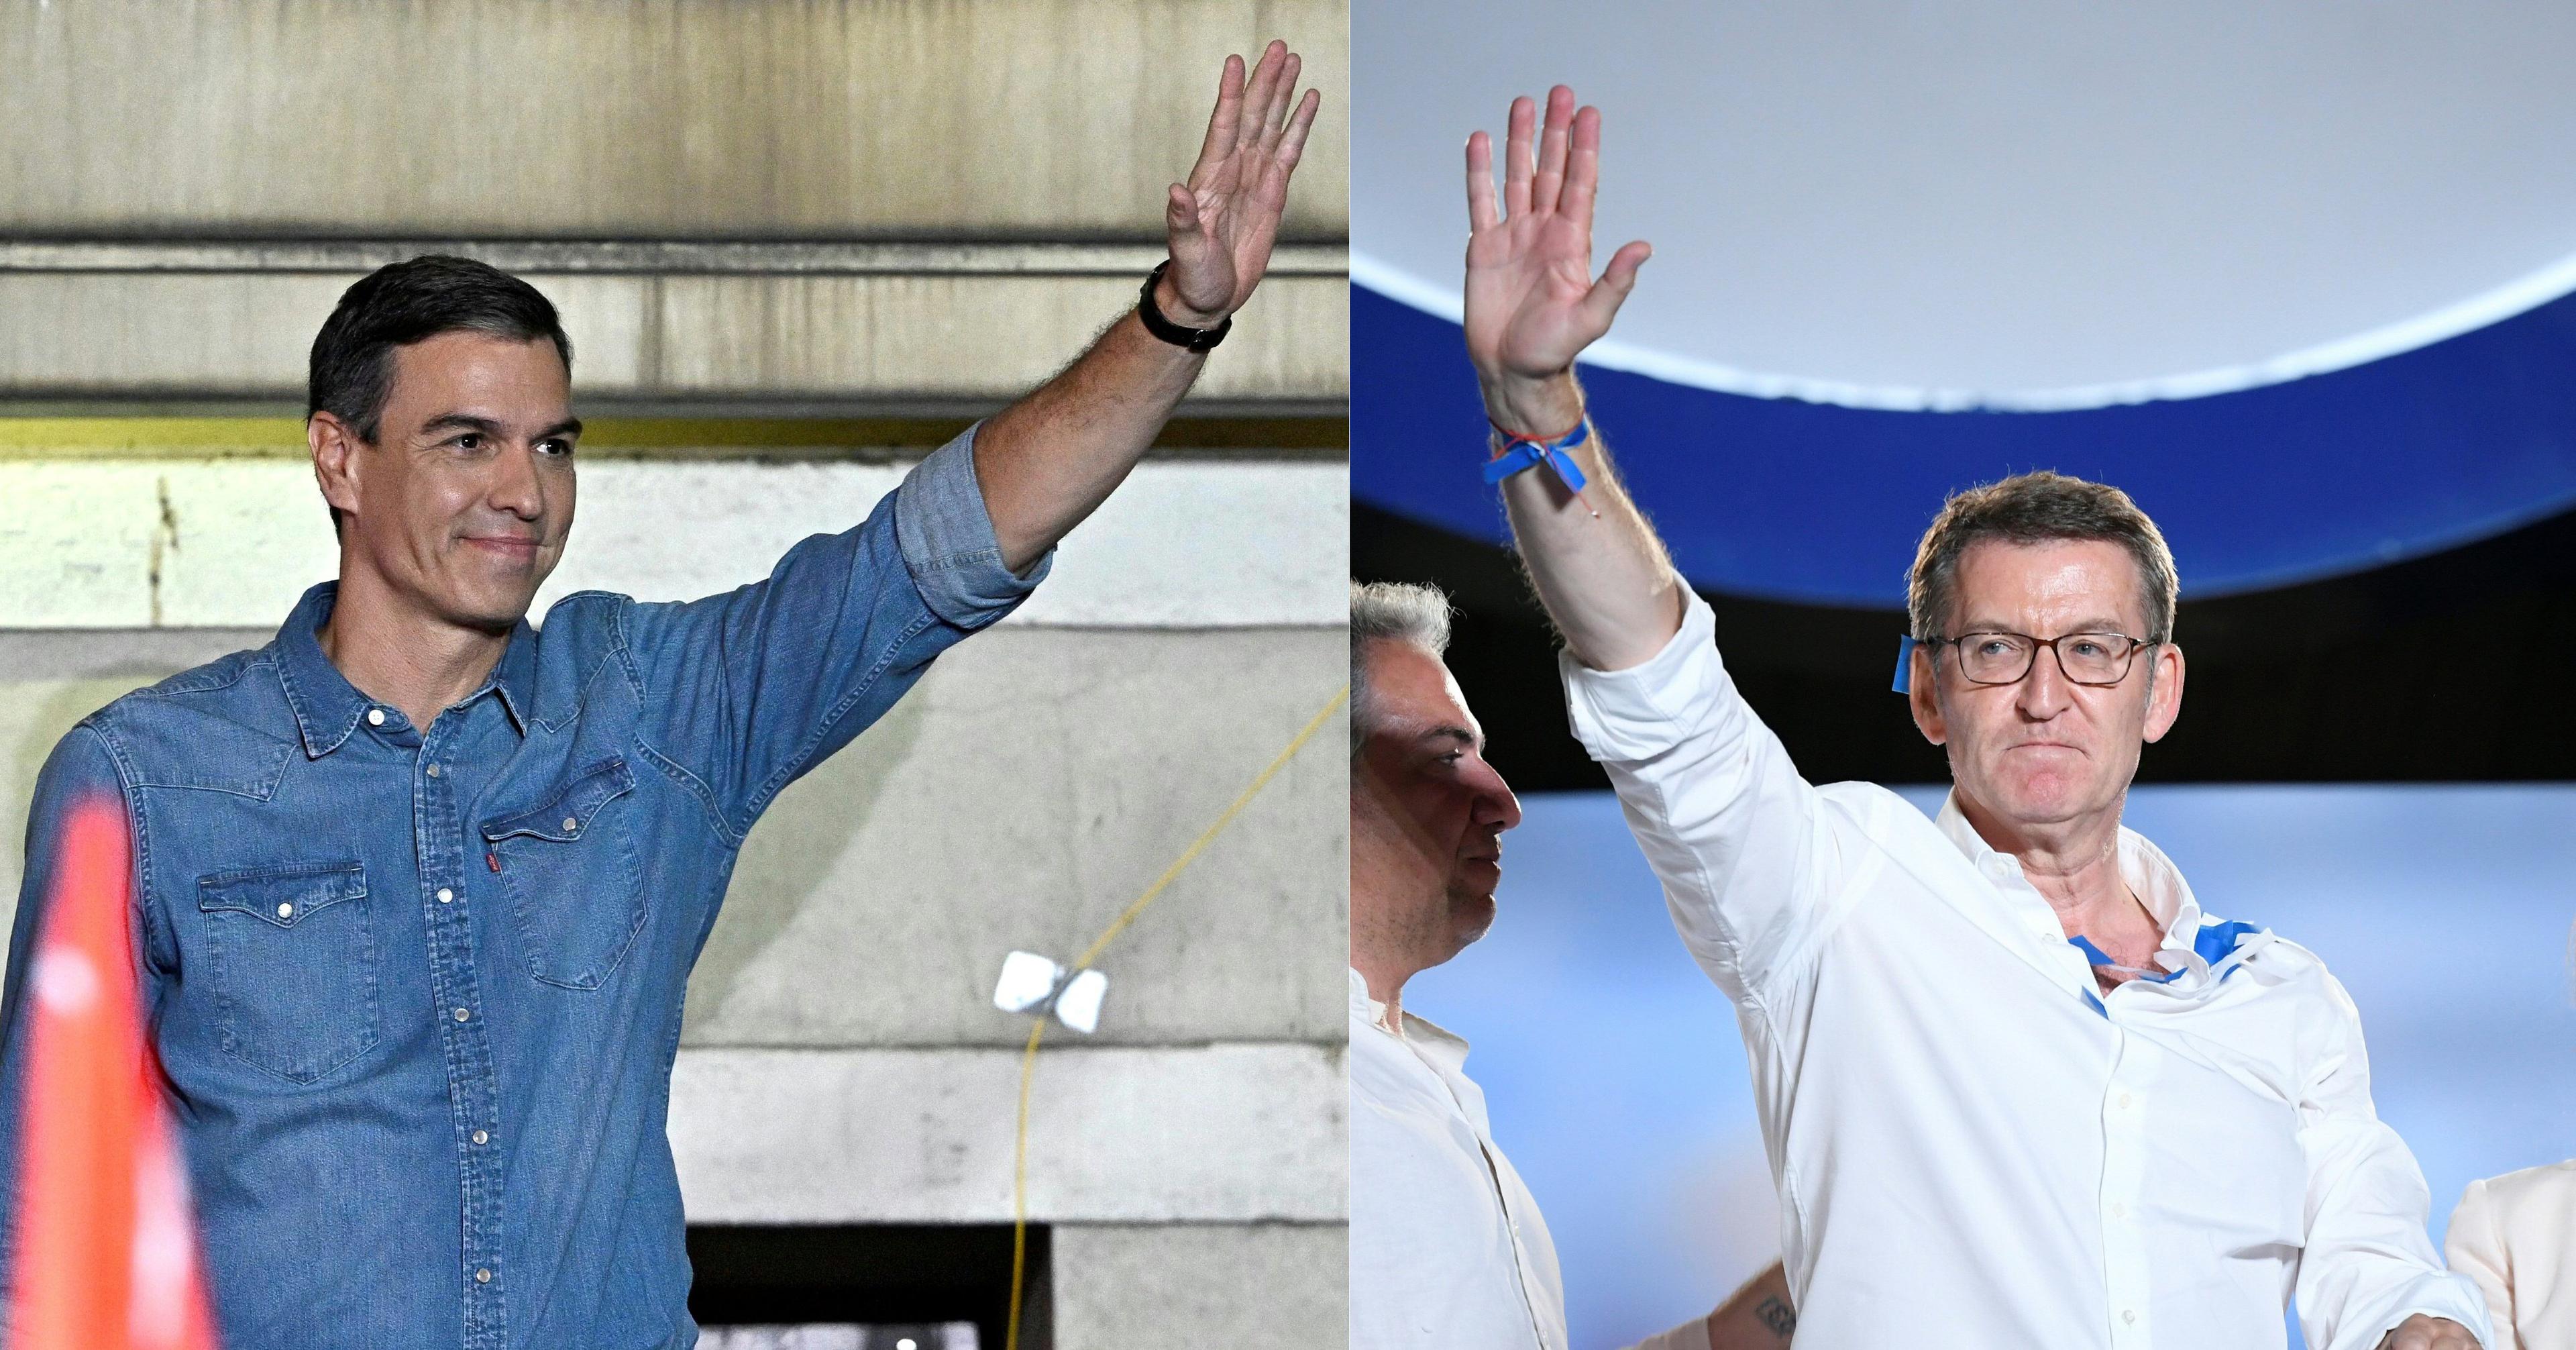 (COMBO) This combination of pictures created on July 24, 2023 shows Spanish Prime Minister and Socialist Party (PSOE) candidate for re-election Pedro Sanchez (R) and leader and candidate of conservative Partido Popular (People's Party) Alberto Nunez Feijoo waving at their headquarters in Madrid after Spain's general election on July 23, 2023. - The Spanish right is only just slightly ahead of the socialists of Prime Minister Pedro Sanchez, who maintains a chance to stay in power through the game of alliances, following Spain's general election. (Photos by JAVIER SORIANO and OSCAR DEL POZO / AFP)